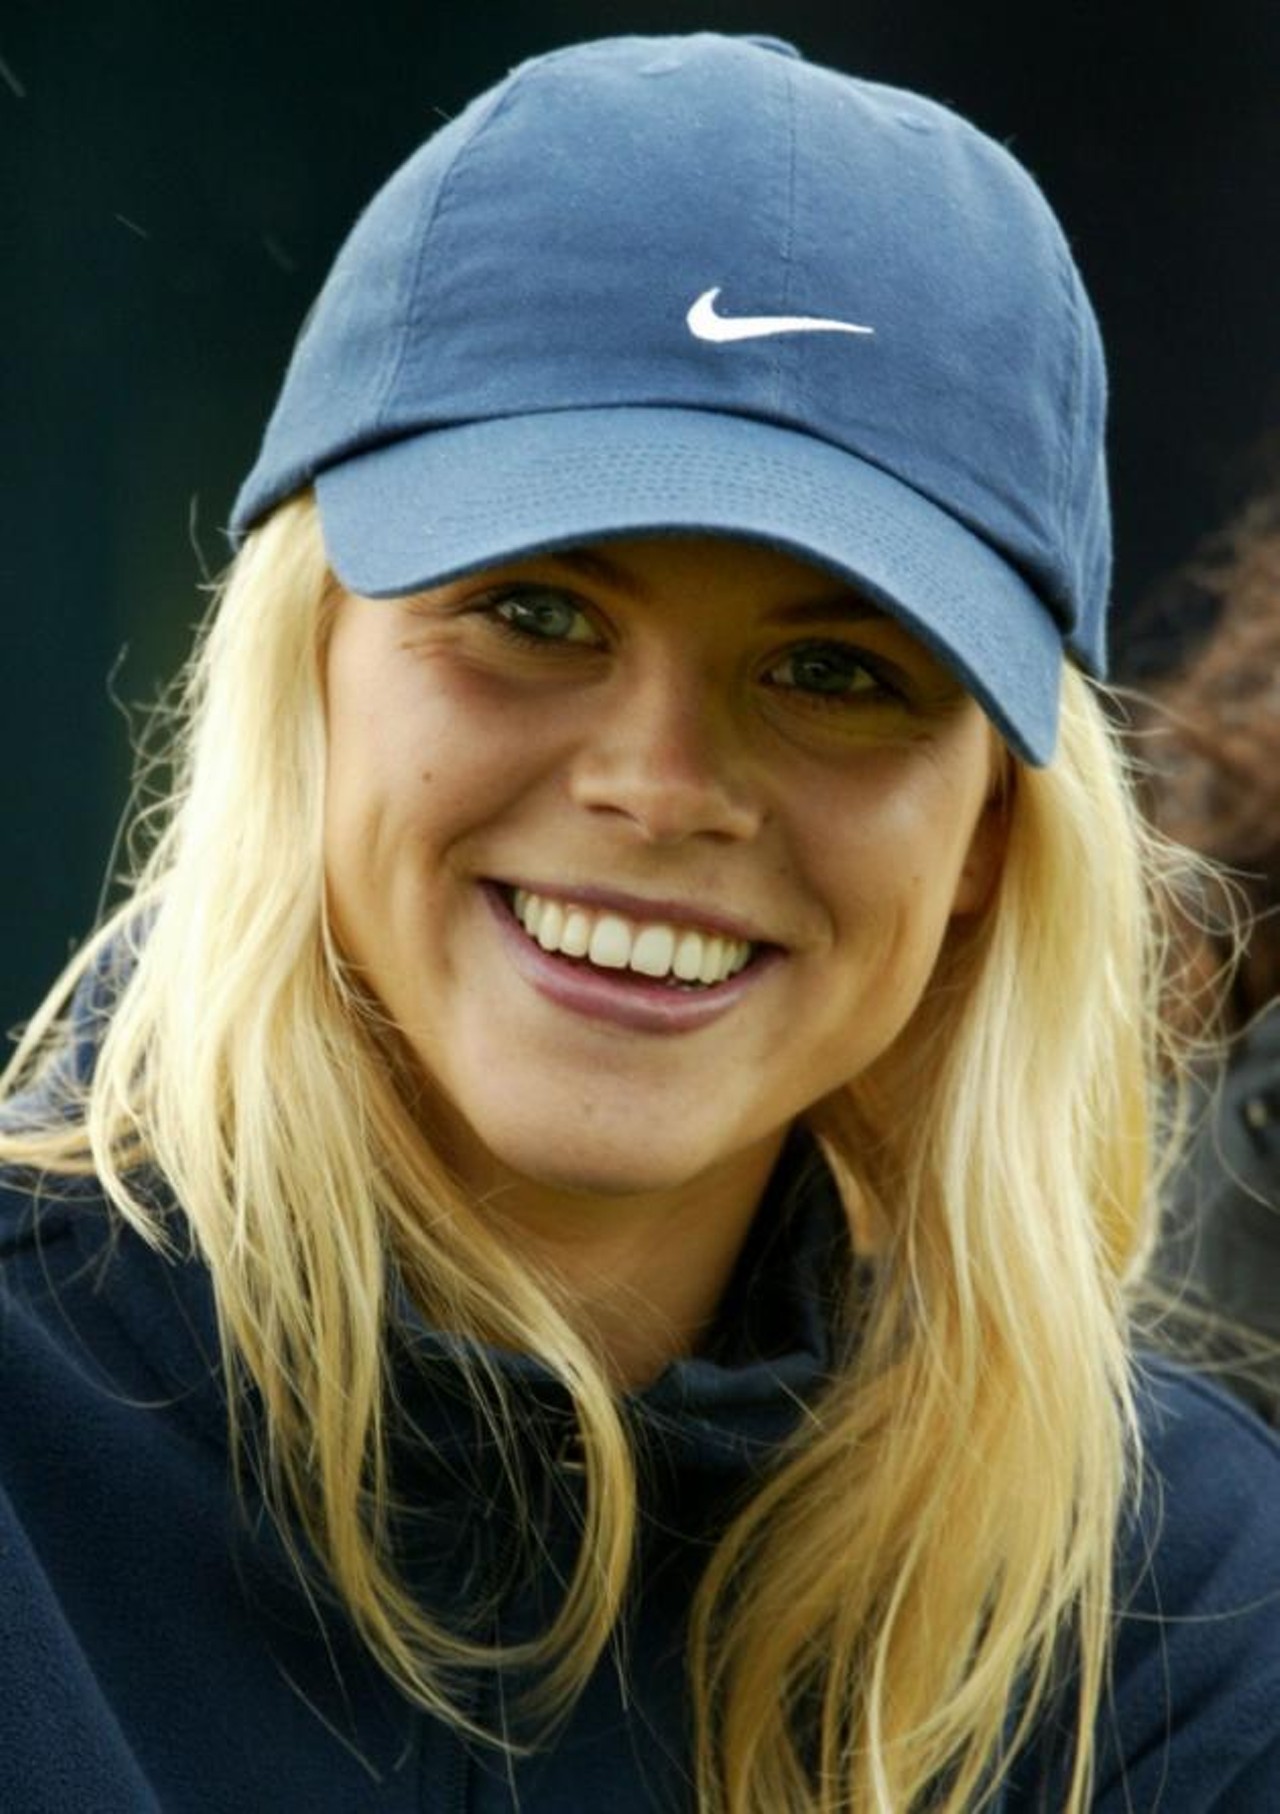 Elin Nordegren- A former model from Sweden and ex-wife of Tiger Woods.